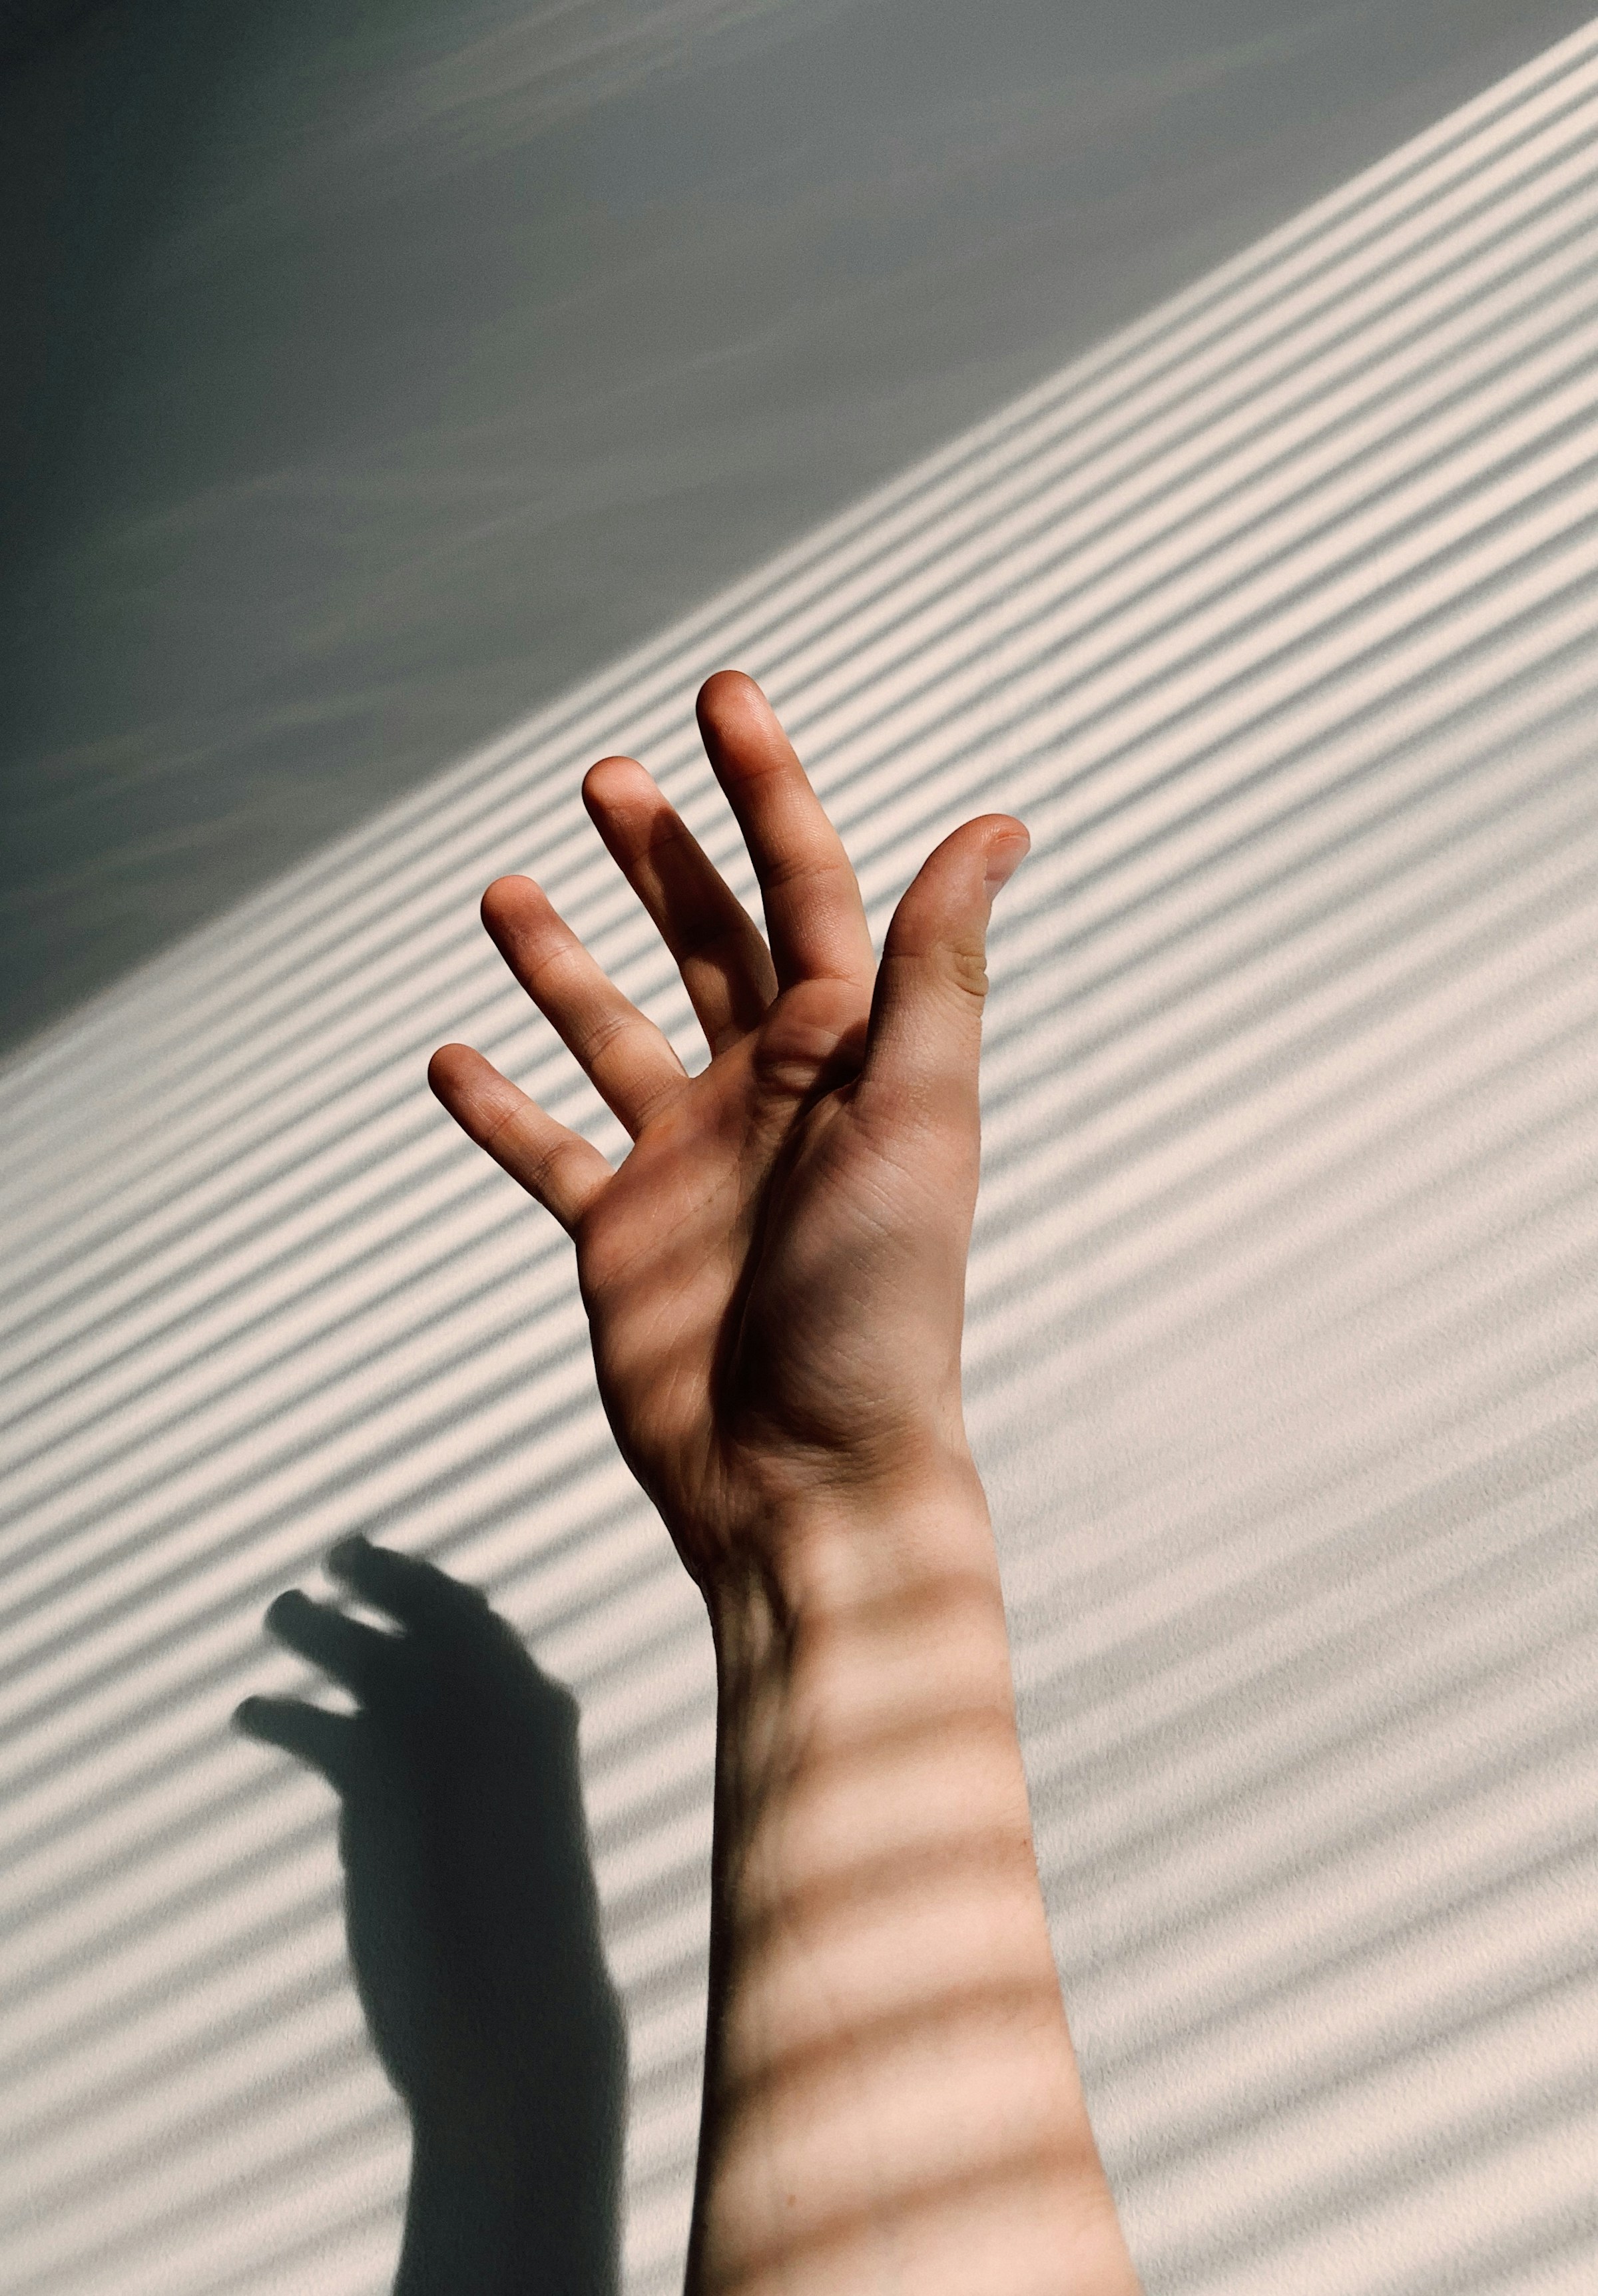 A man's outstretched hand | Source: Unsplash